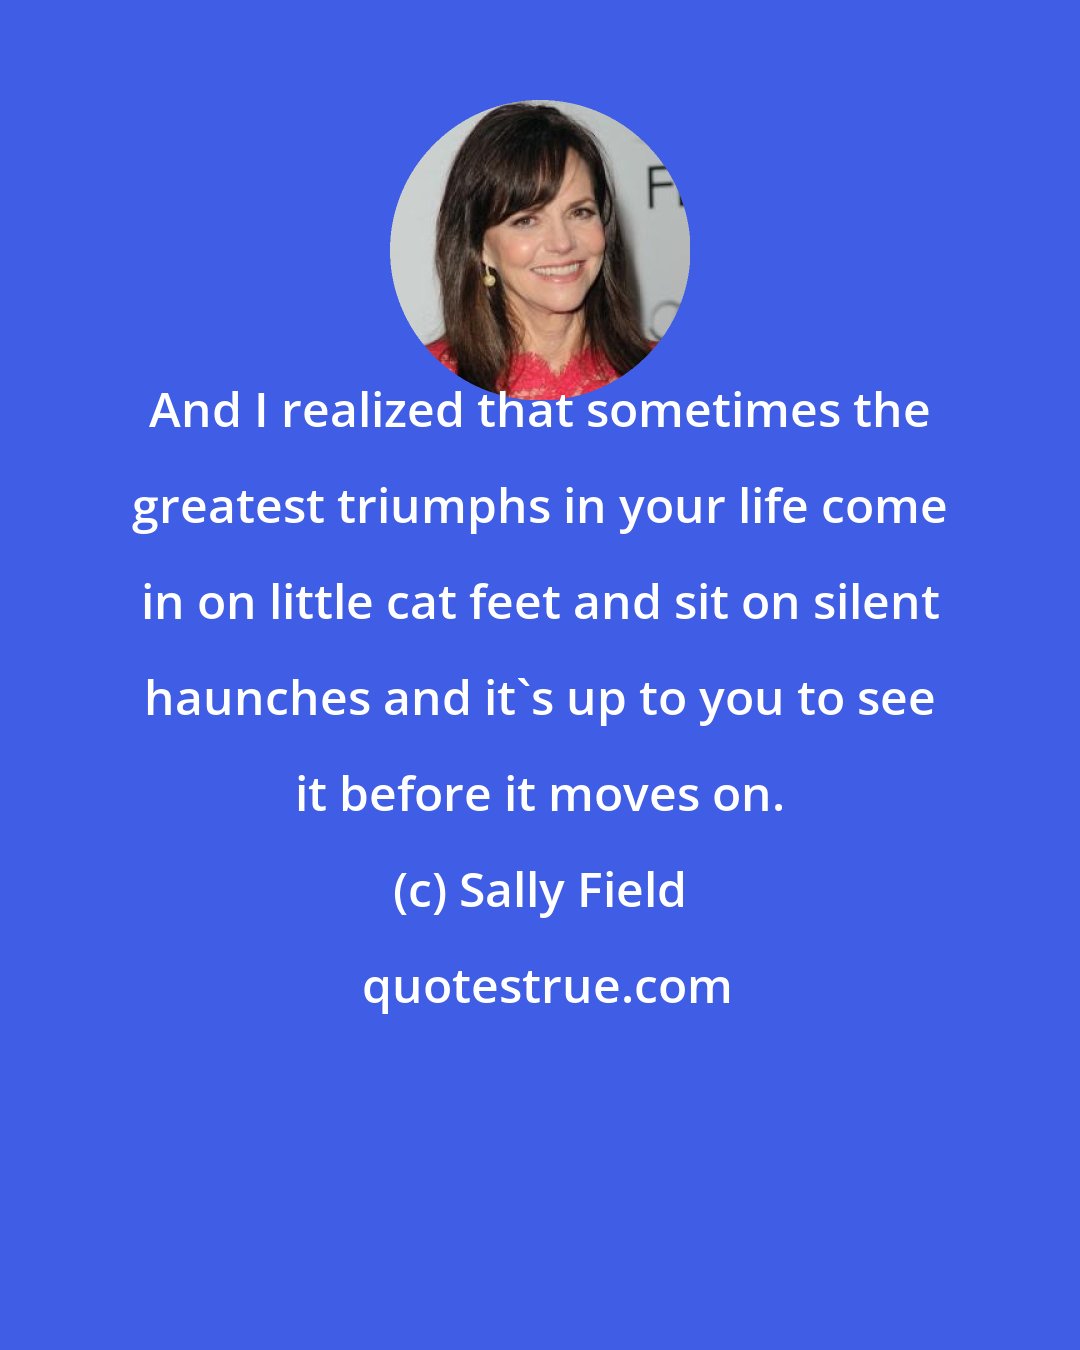 Sally Field: And I realized that sometimes the greatest triumphs in your life come in on little cat feet and sit on silent haunches and it's up to you to see it before it moves on.